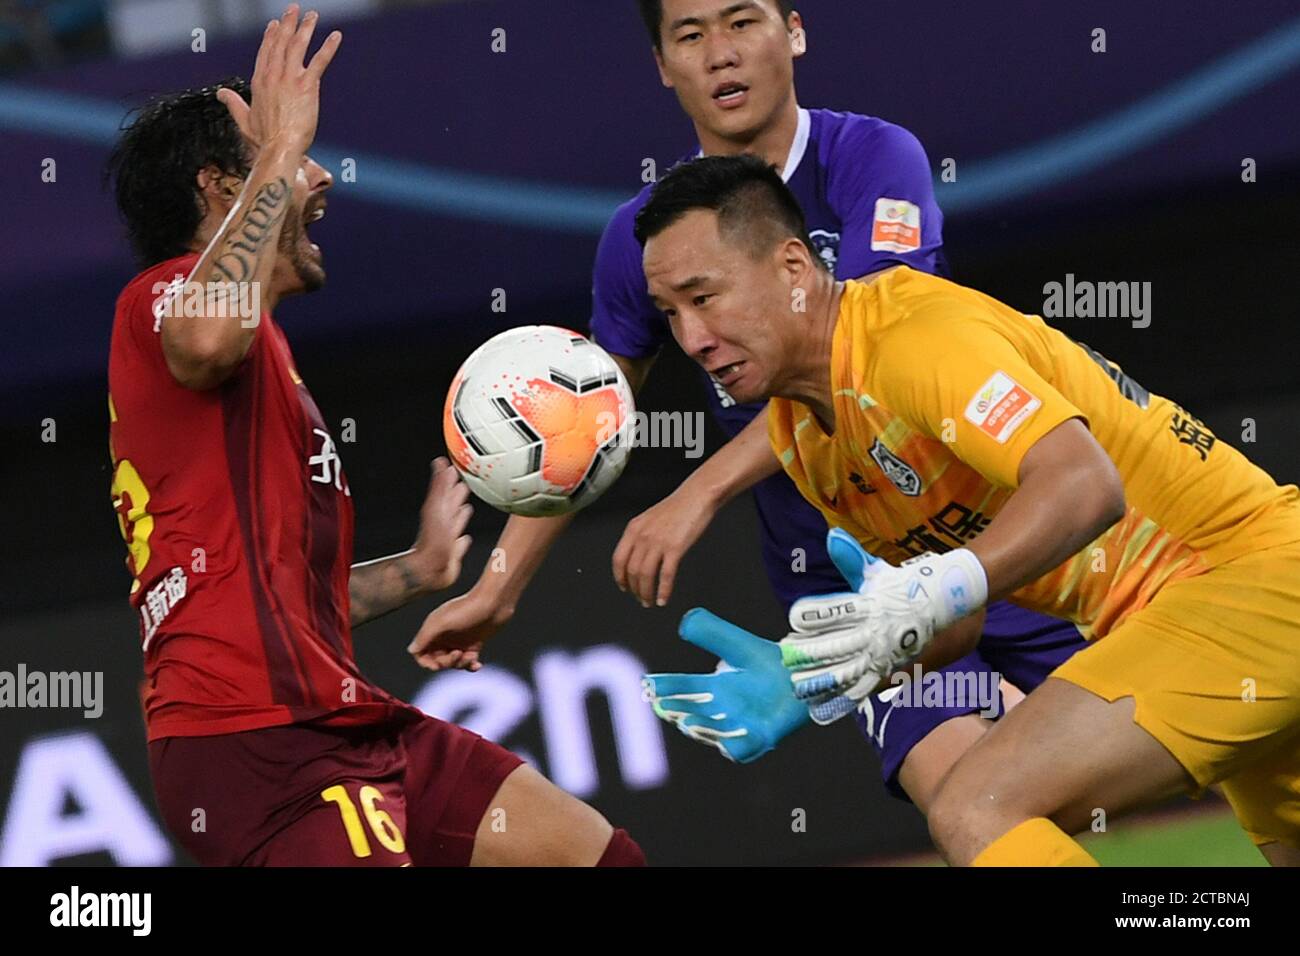 Suzhou, China's Jiangsu Province. 22nd Sep, 2020. Teng Shangkun (R), goalkeeper of the Tianjin Taida makes a save during the 12th round match between Hebei China Fortune and Tianjin Taida at the postponed 2020 season Chinese Football Association Super League (CSL) Suzhou Division in Suzhou, east China's Jiangsu Province, Sept. 22, 2020. Heibei China Fortune won 1-0. Credit: Han Yuqing/Xinhua/Alamy Live News Stock Photo